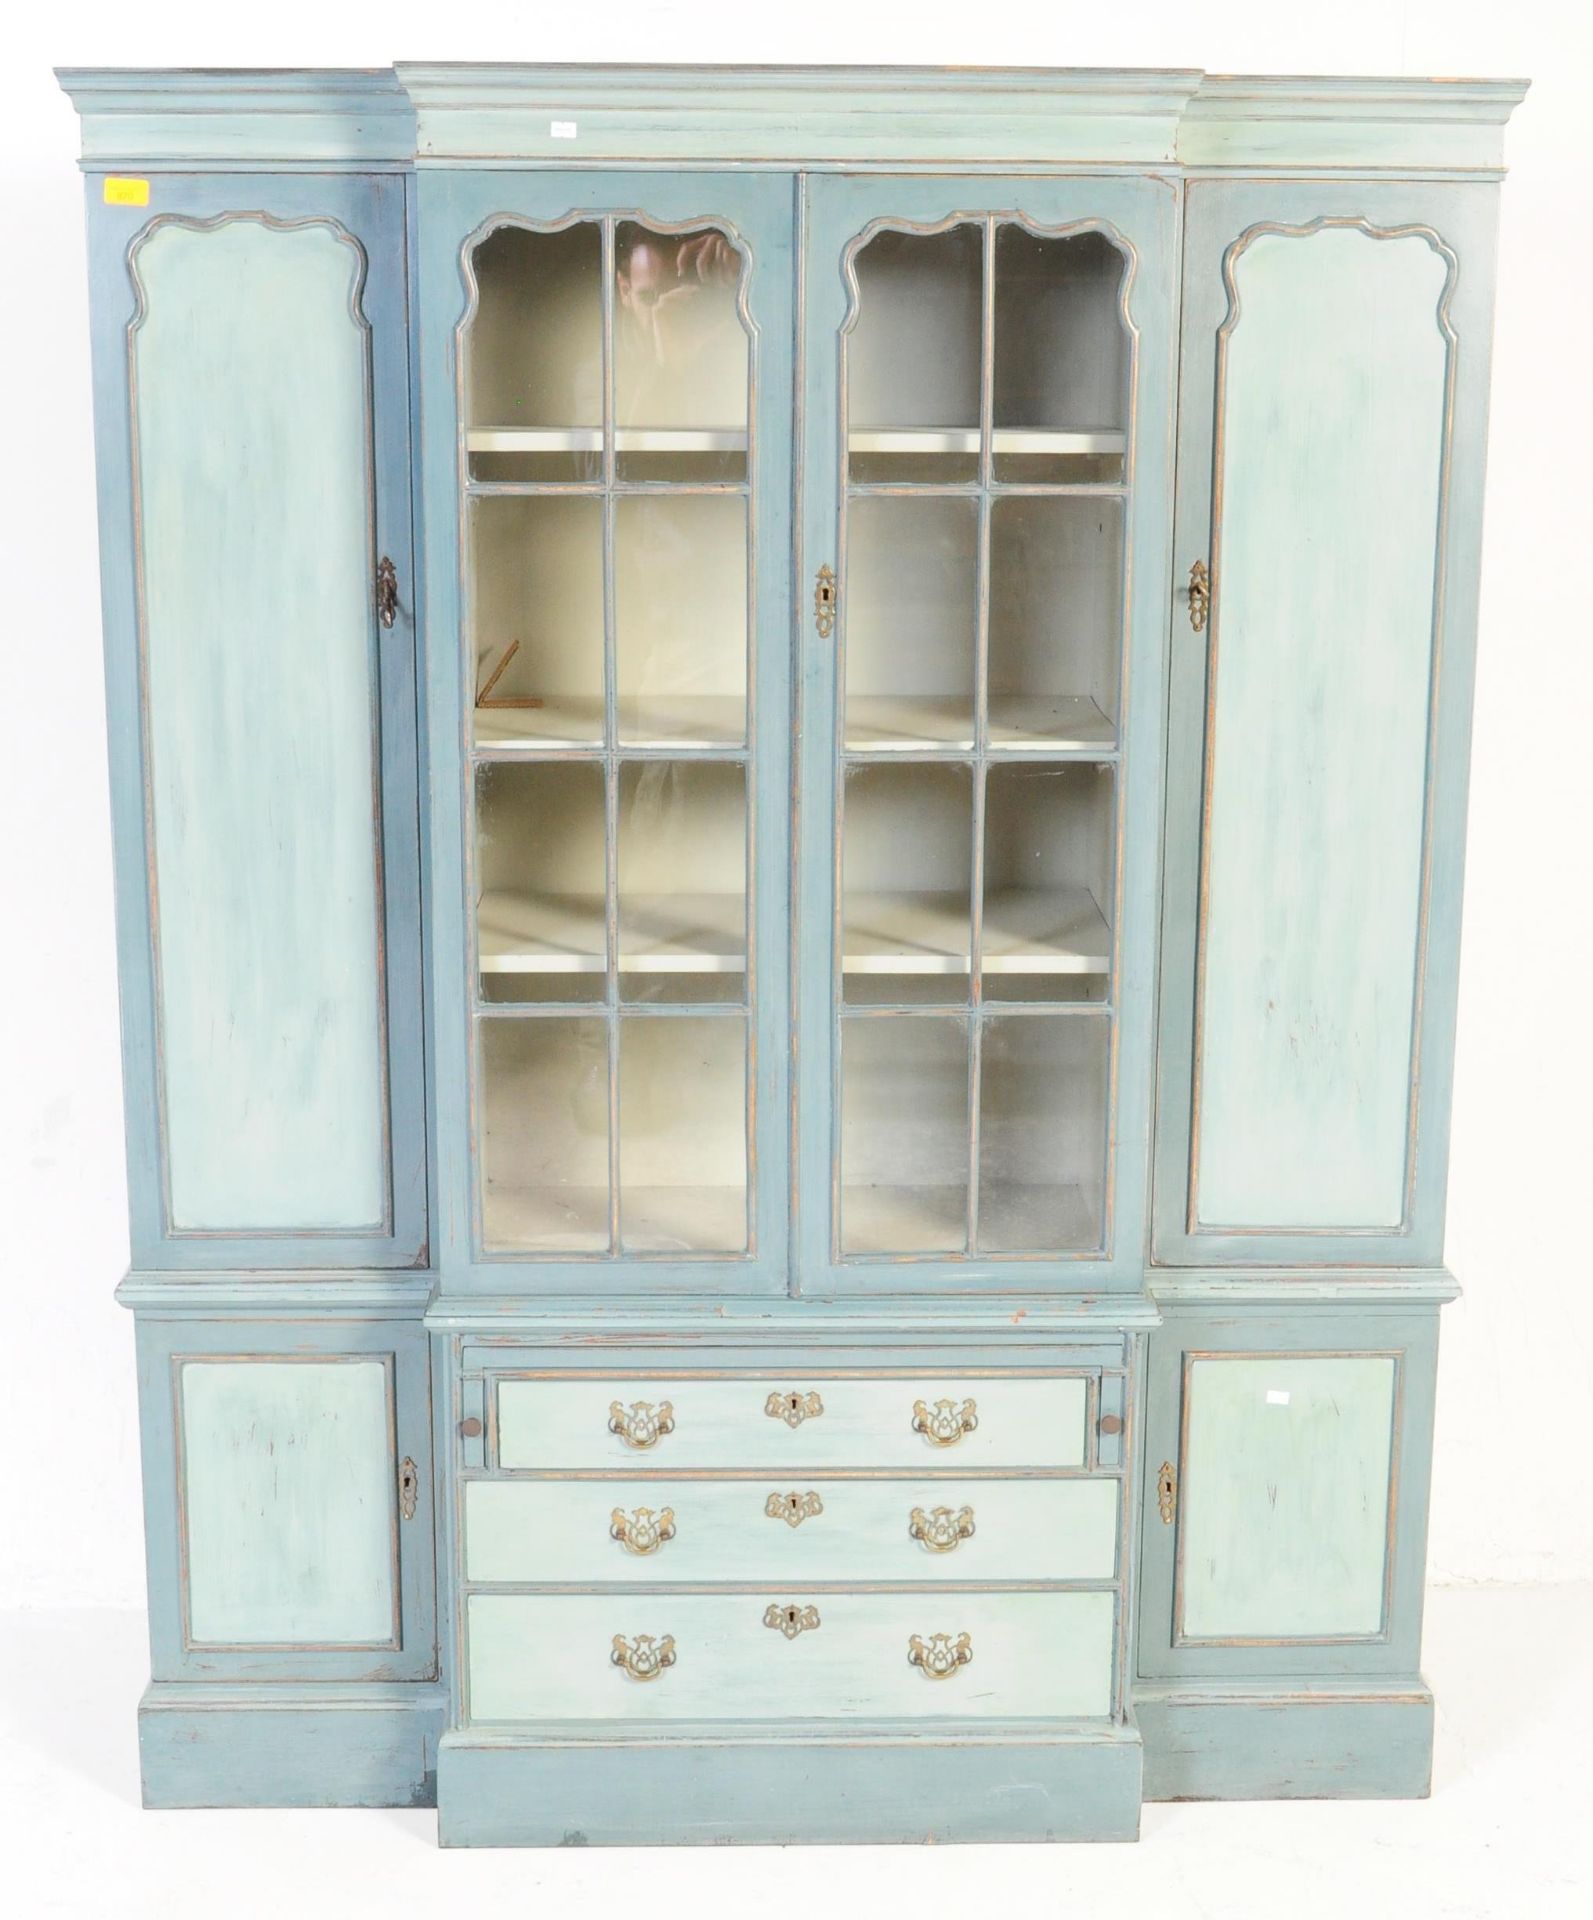 20TH CENTURY PAINTED BREAKFRONT BOOKCASE CABINET - Image 2 of 7